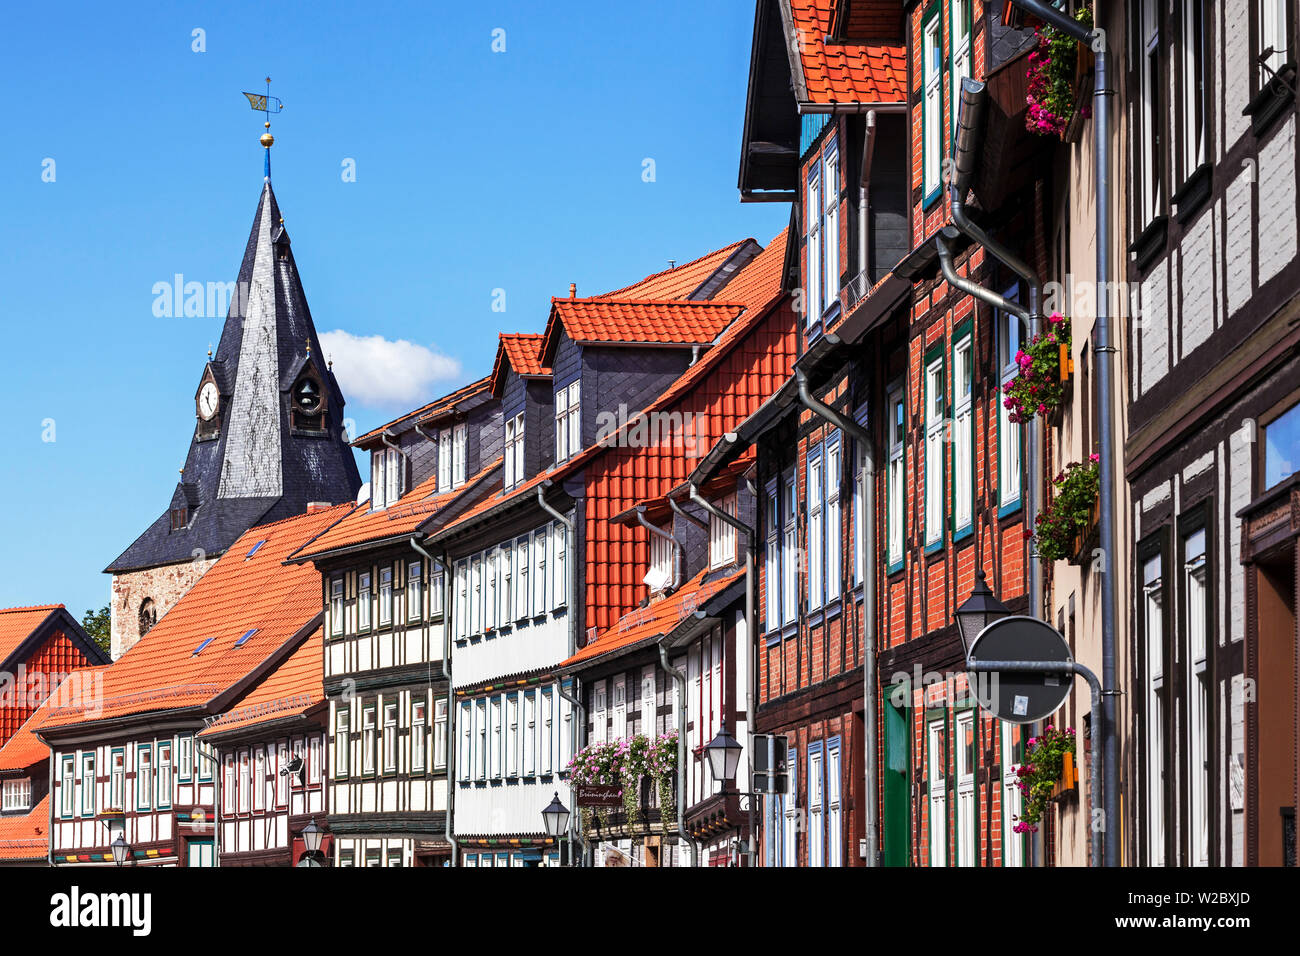 Timber framed houses, old town, Wernigerode, Harz Mountains,  Saxony-Anhalt, Germany Stock Photo